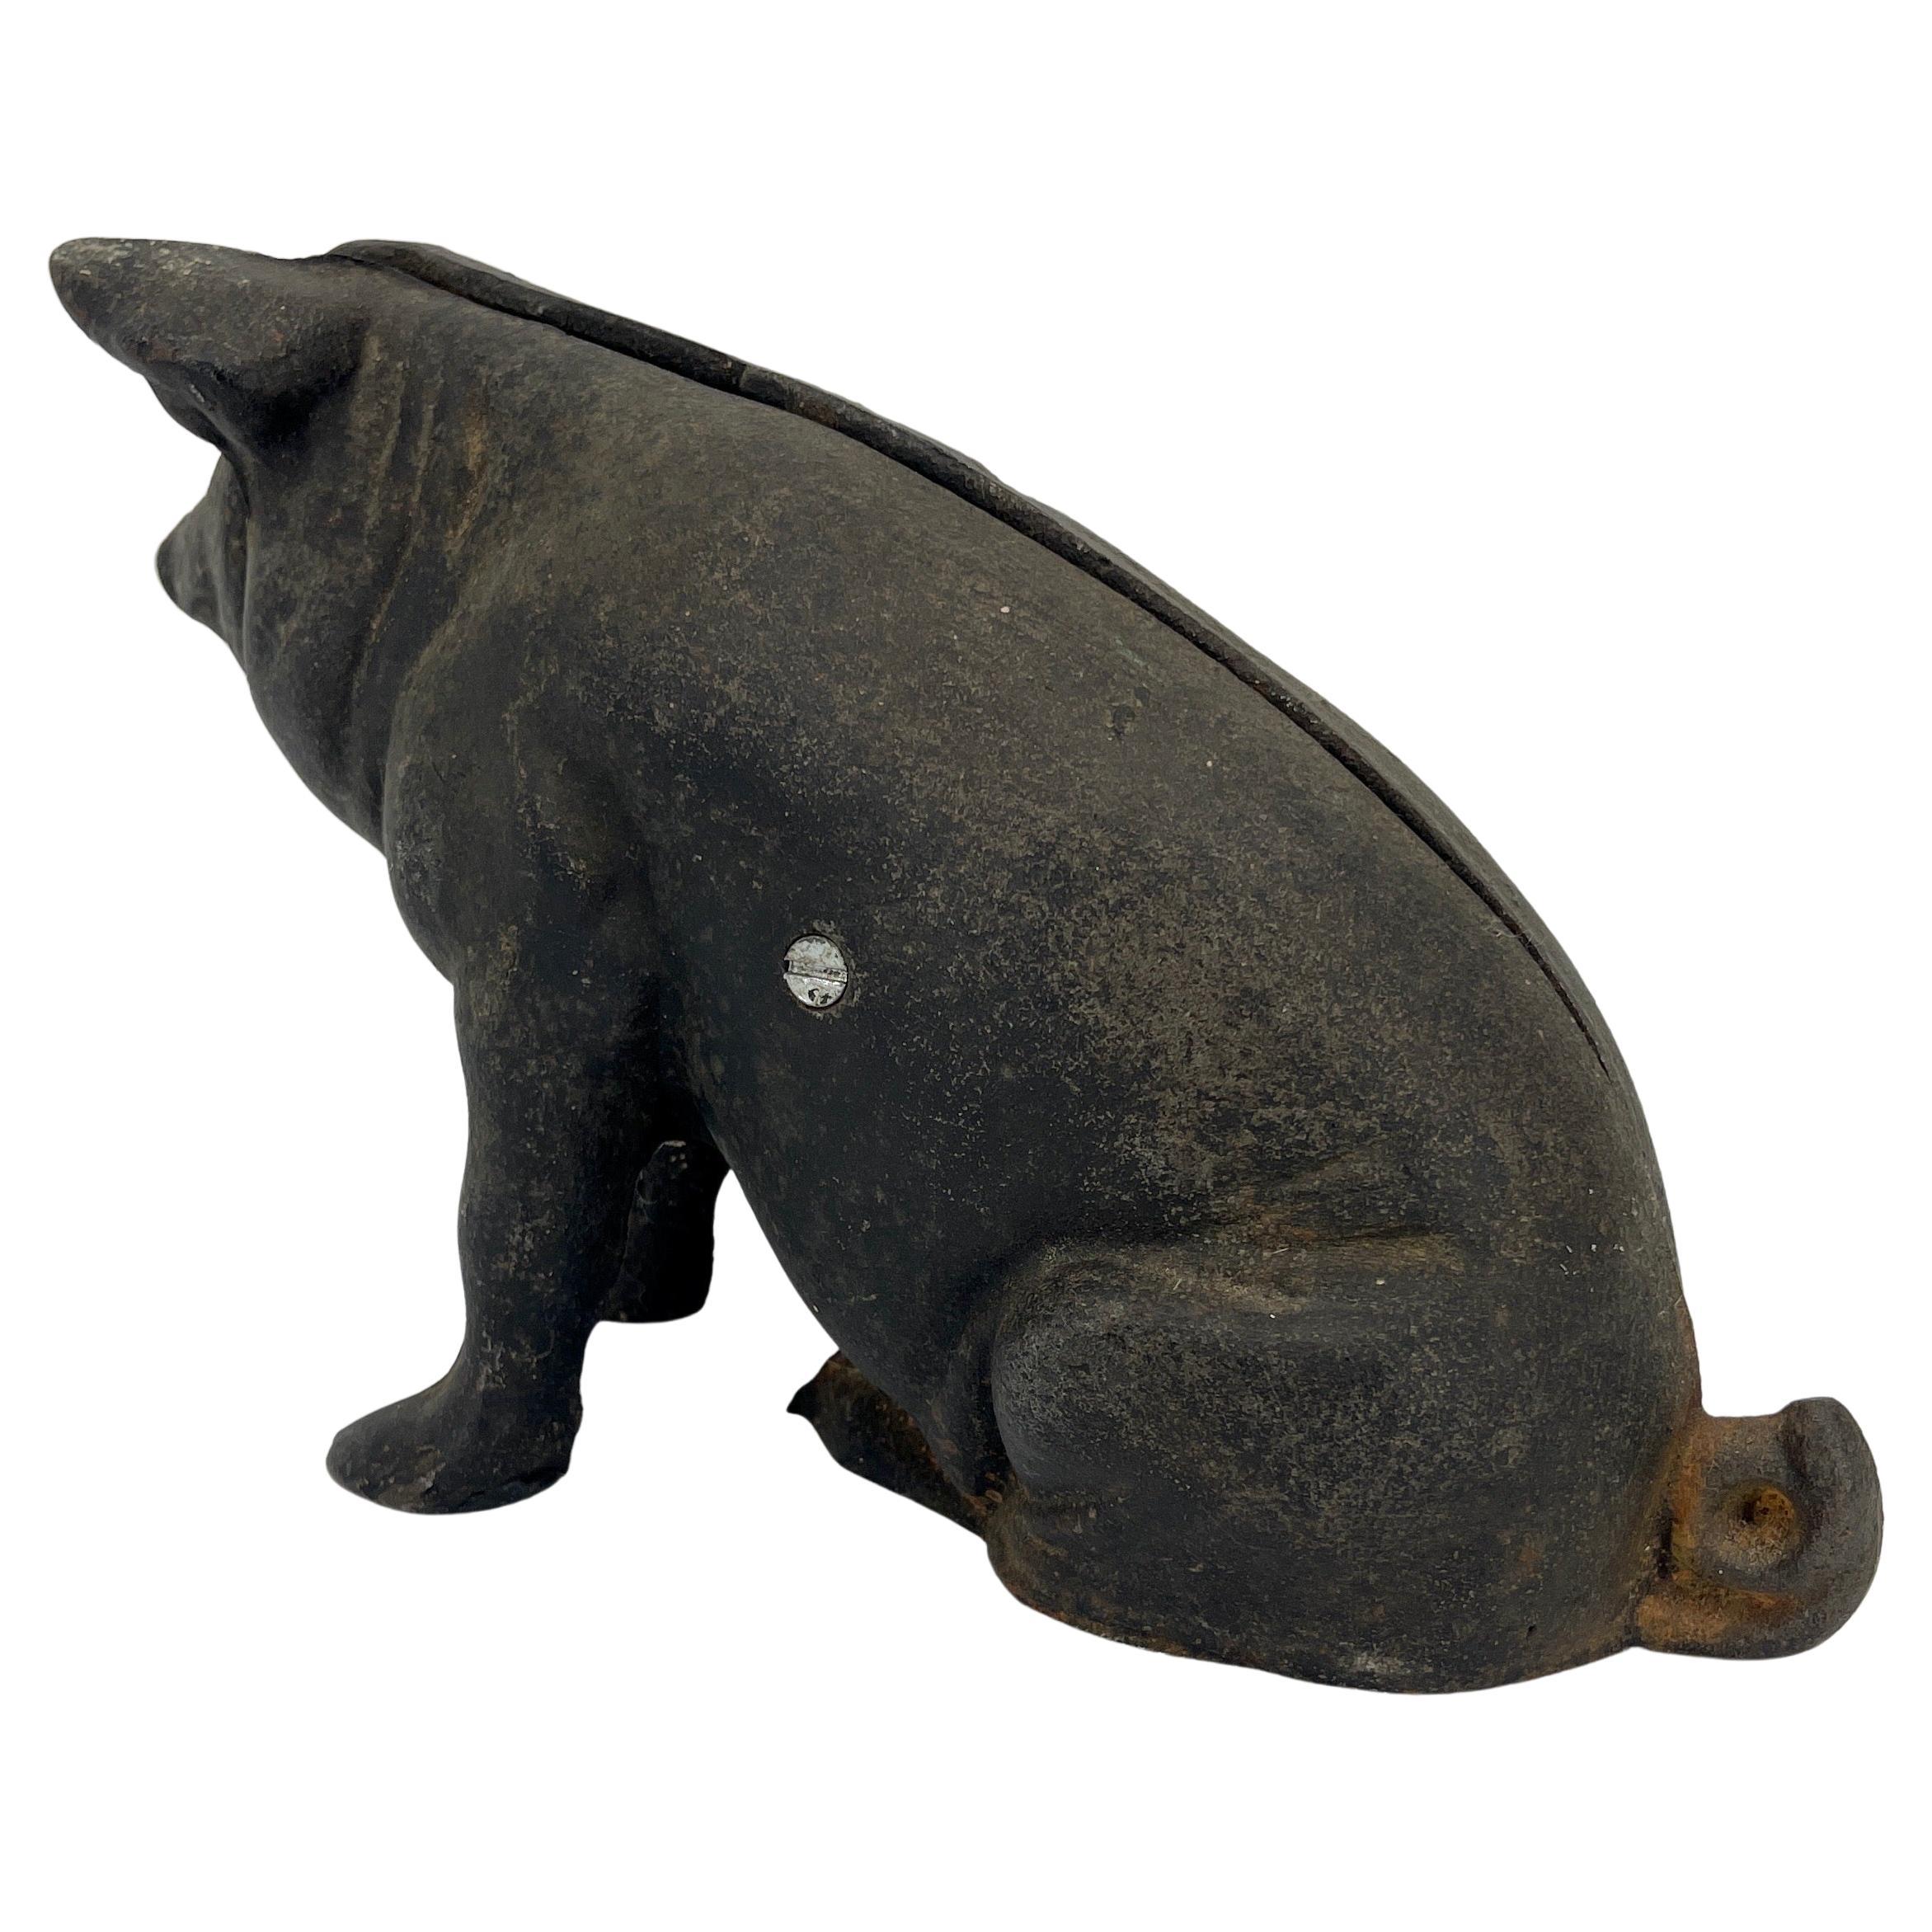 Cast iron pig statue or doorstop. This heavy and adorable pig statue is in very good original condition. Black cast iron pig made in two pieces with screw holding the body together, this enchanting piggy is perfect as a desk accessory or as a door